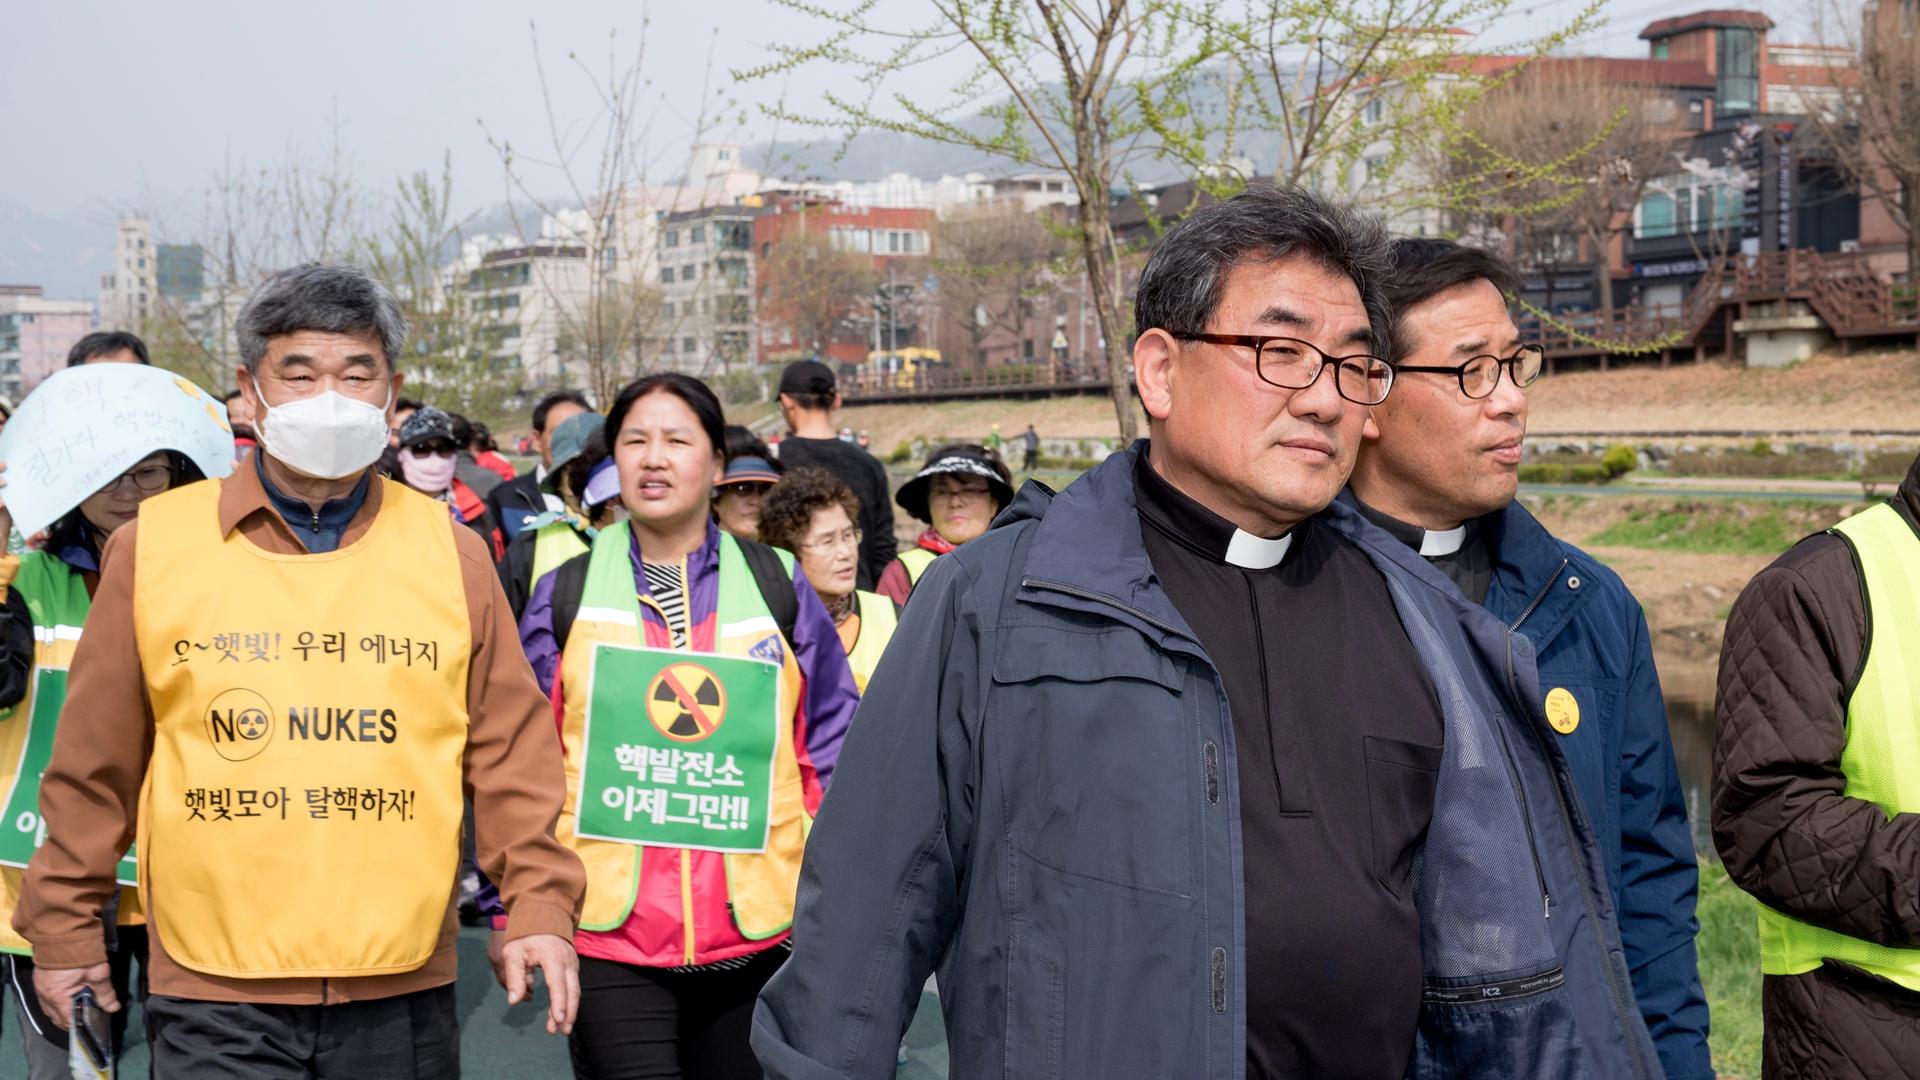 Catholic priests lead a protest march at an anti-nuclear demonstration outside of Seoul in April 2017.